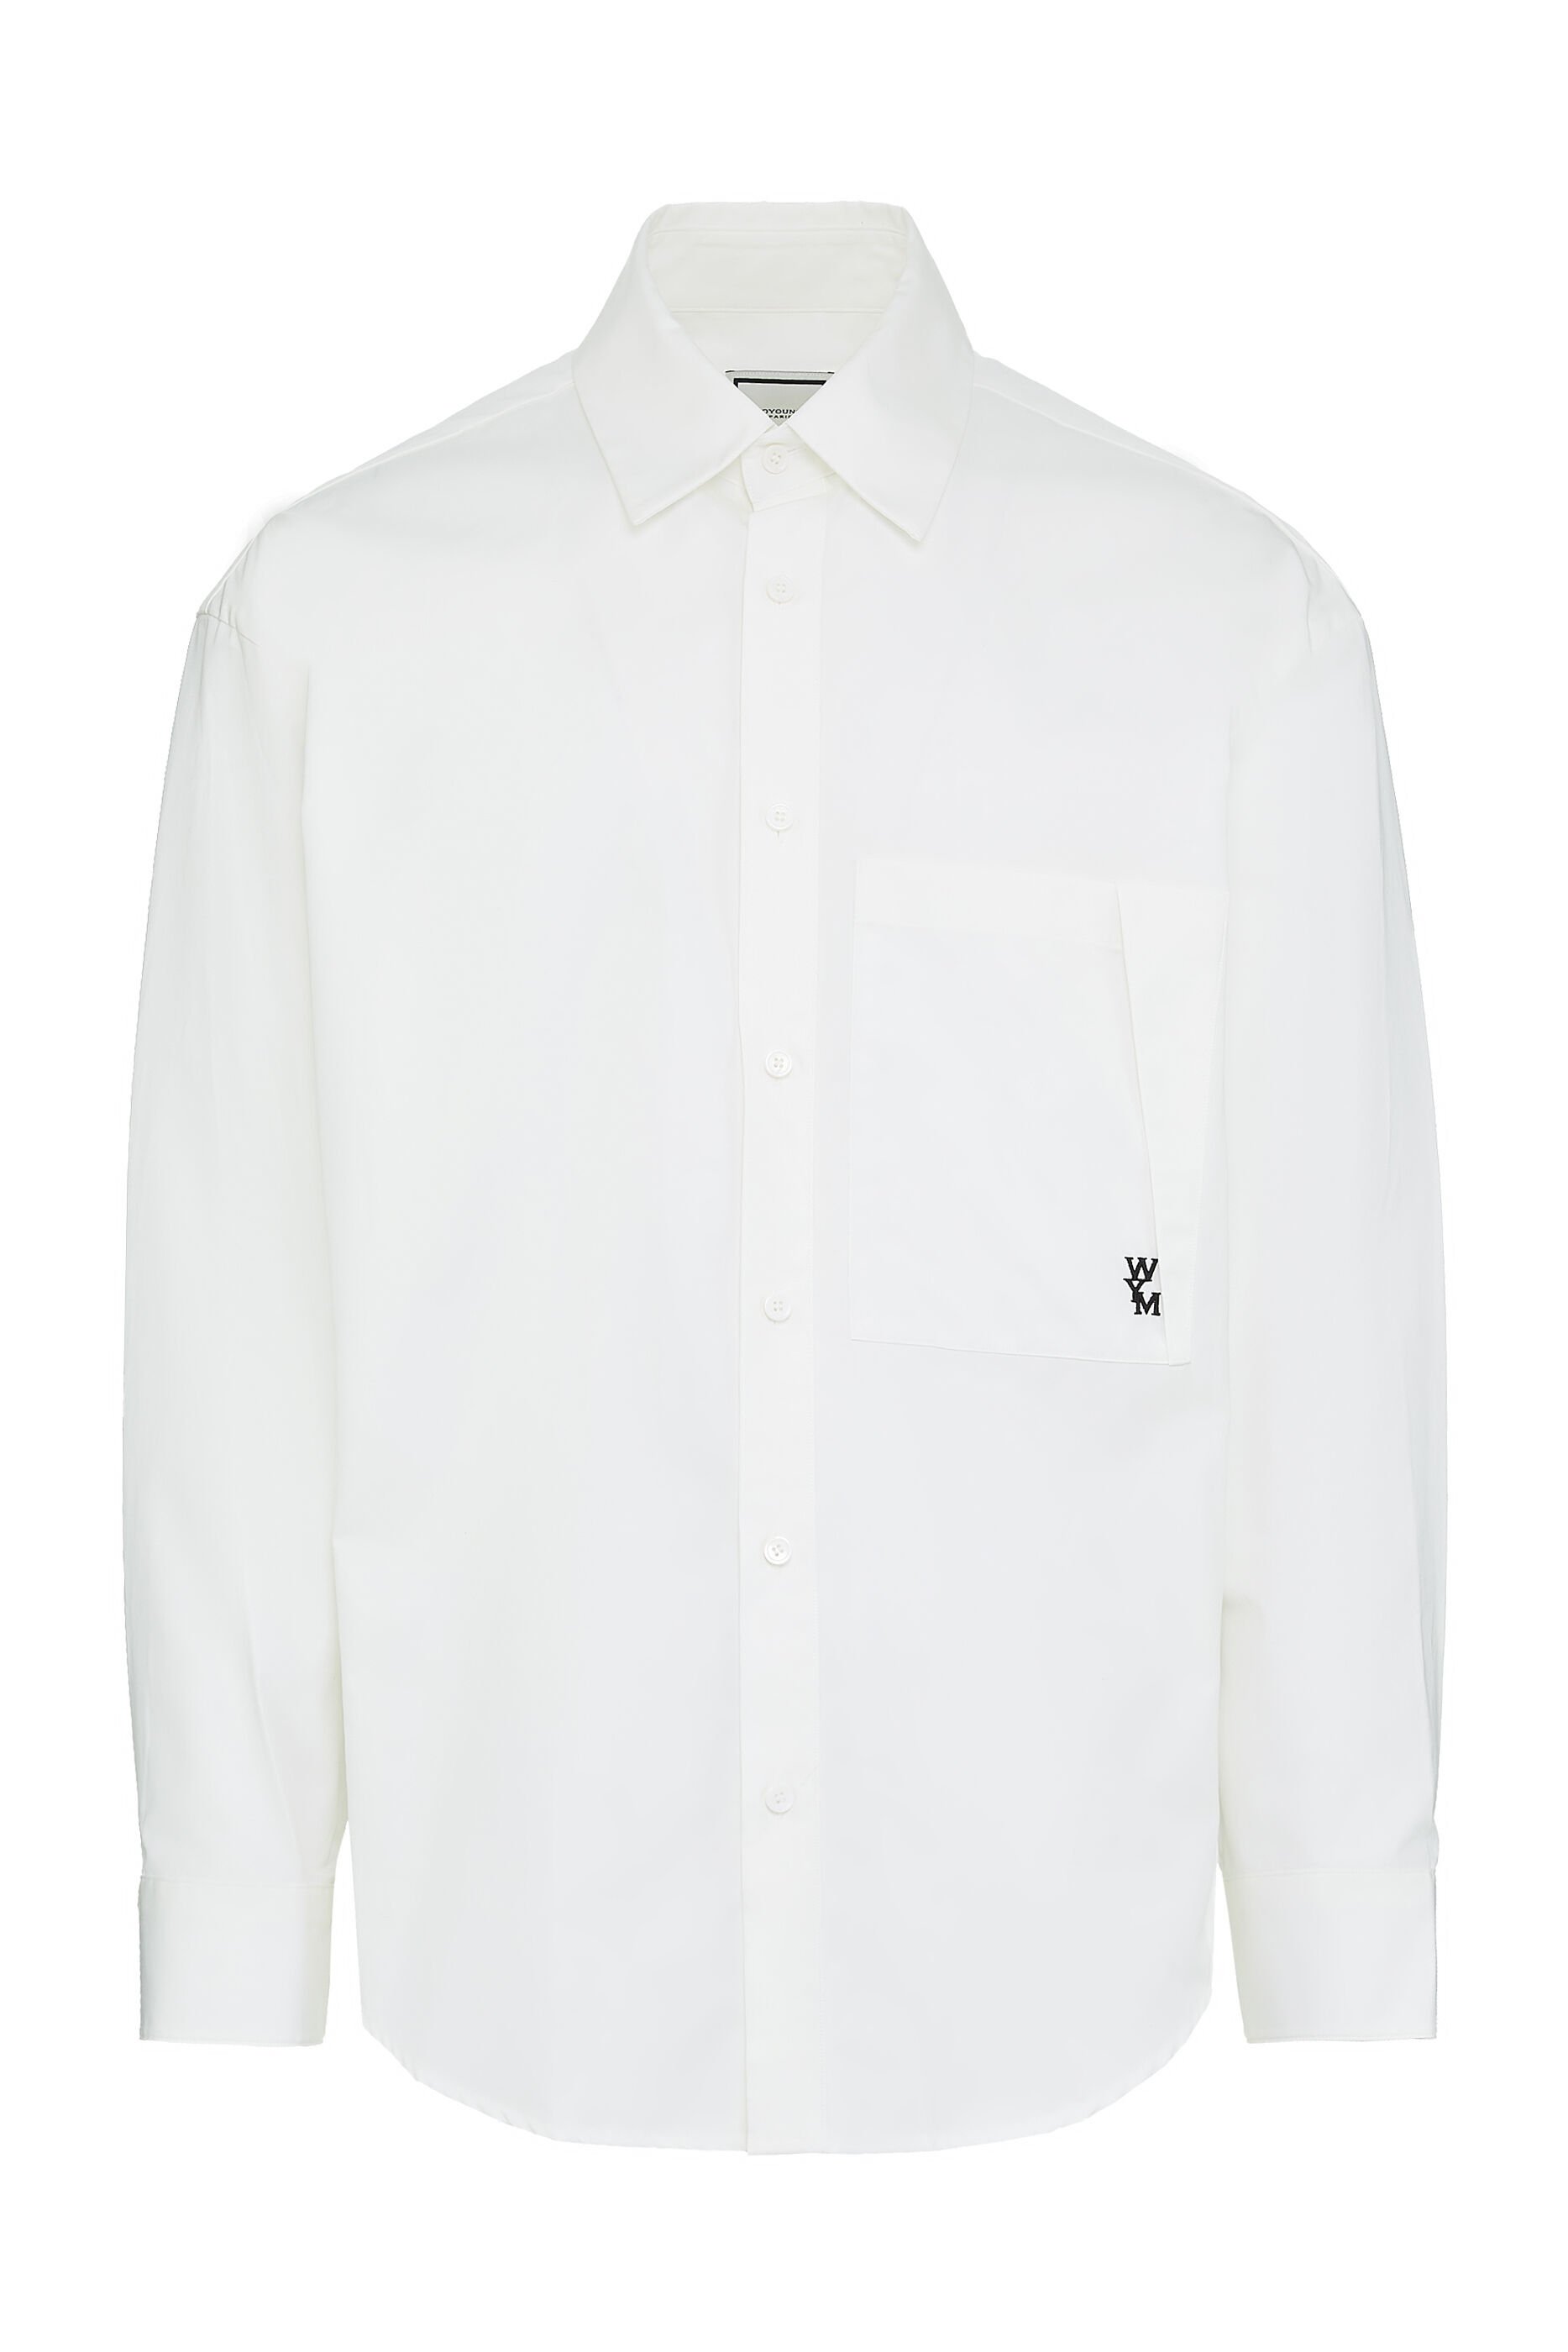 Wooyoungmi White Spread Collar Shirt